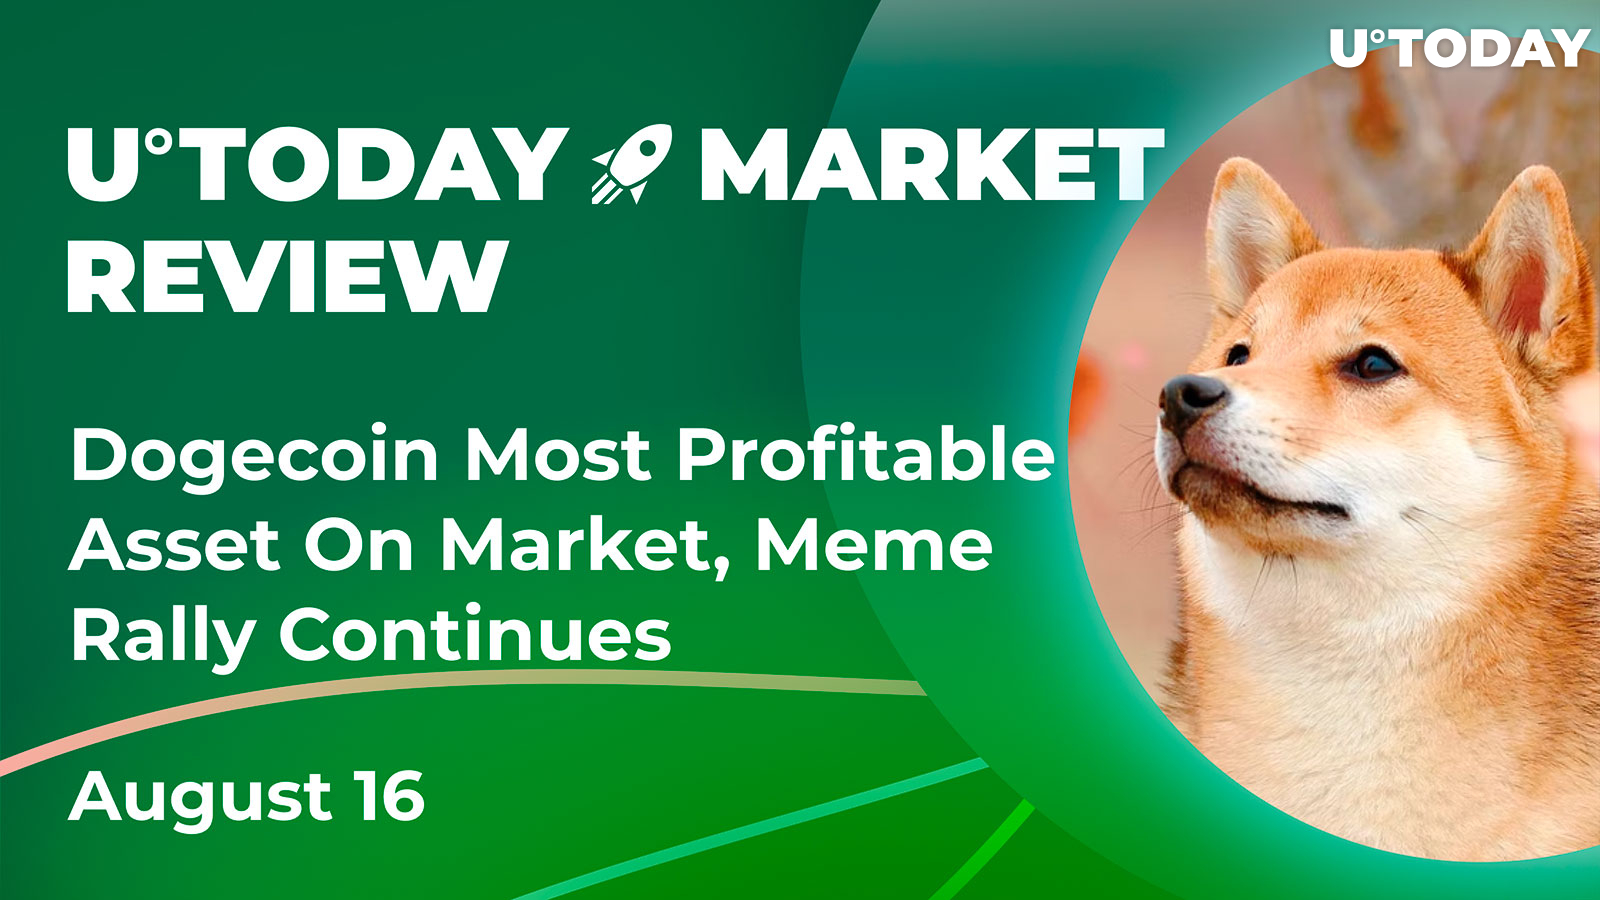 Dogecoin Most Profitable Asset on Market, Meme Rally Continues: Crypto Market Review, August 16